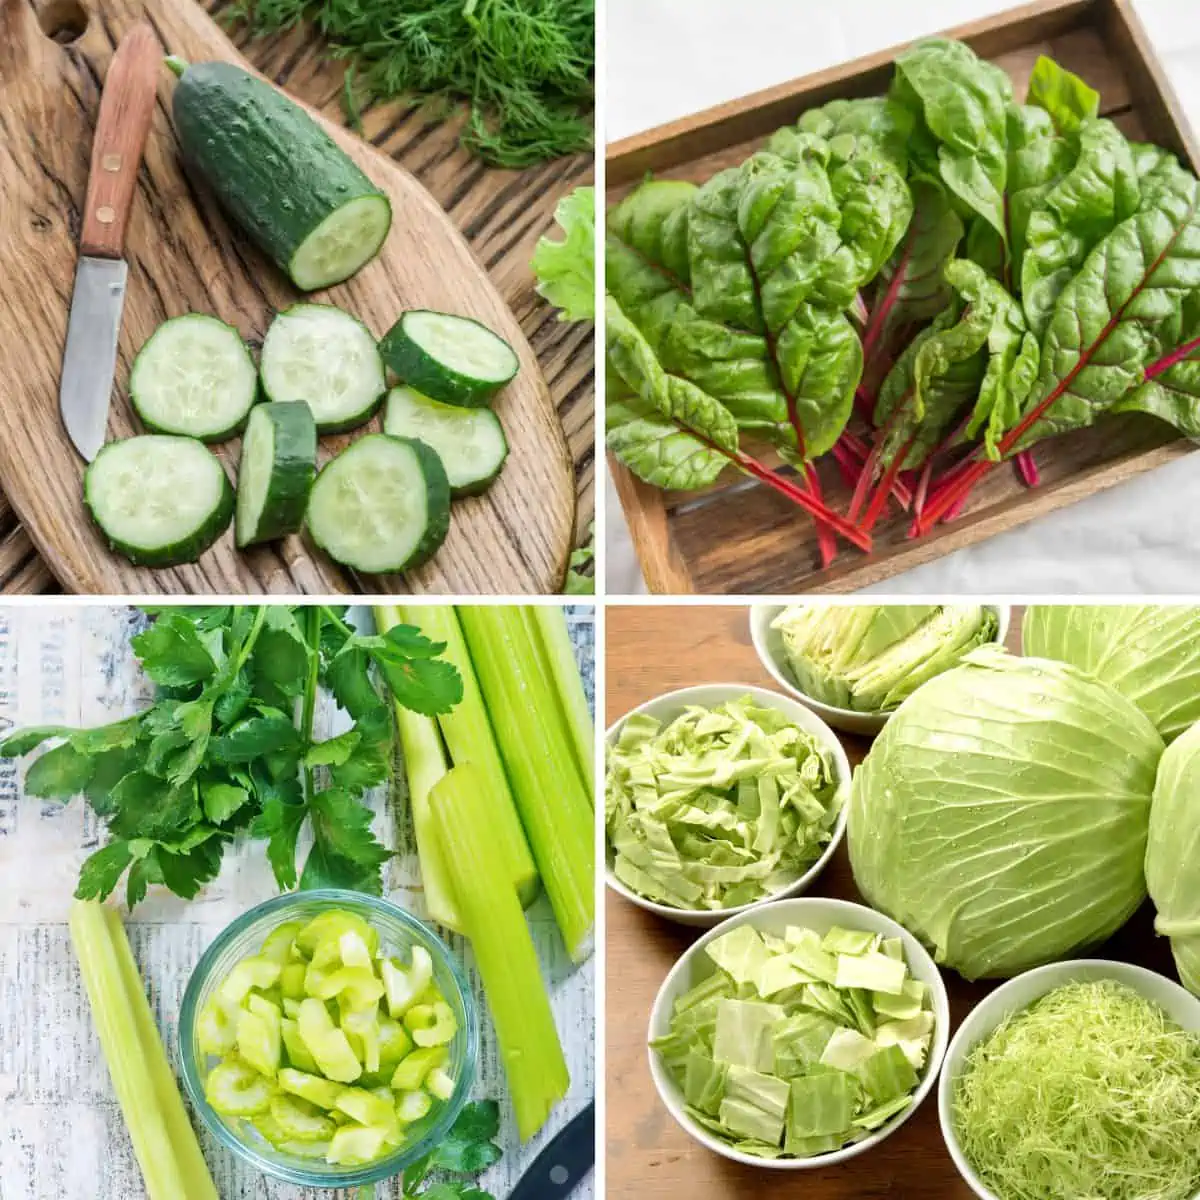 Vegetables that Start with C: cucumbers, chard, cabbage, celery.
